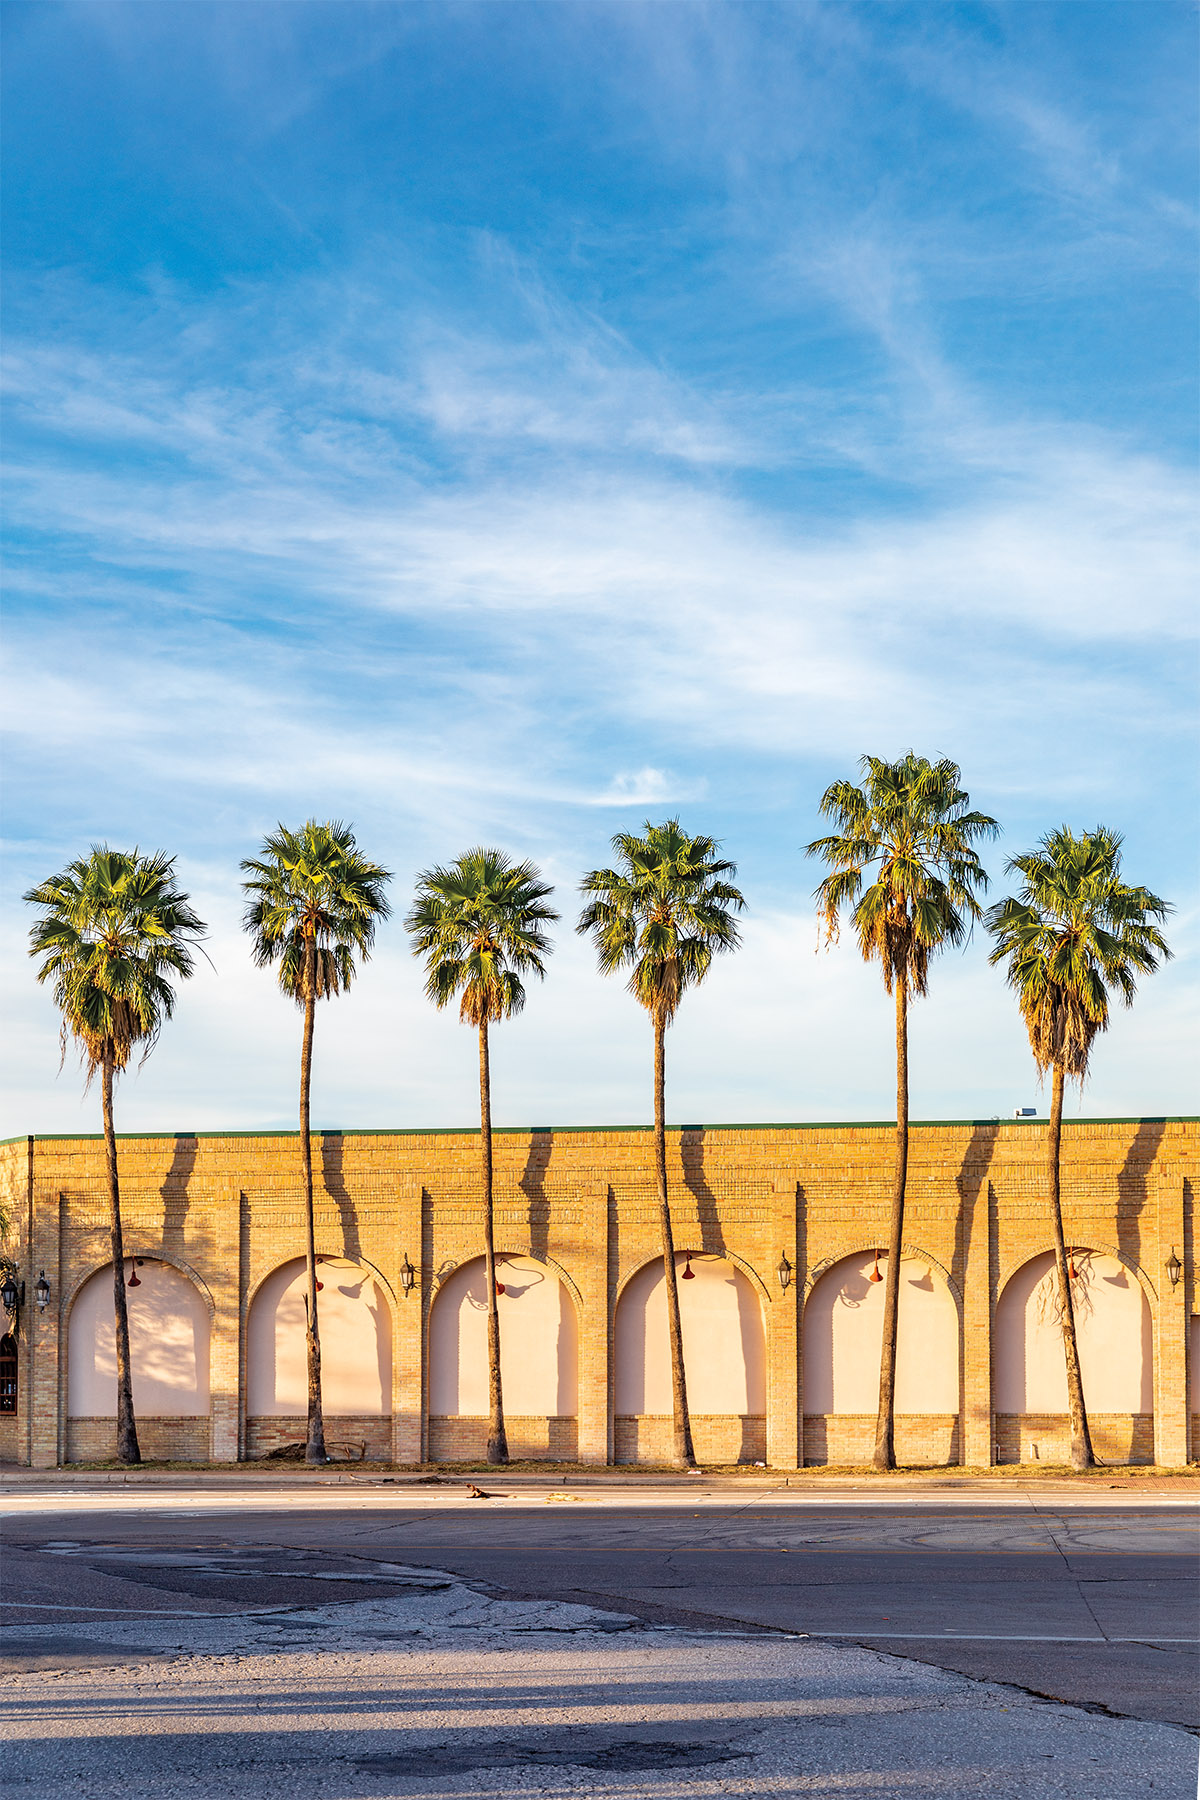 Palm trees sway above a golden building with archways beneath a clear blue sky